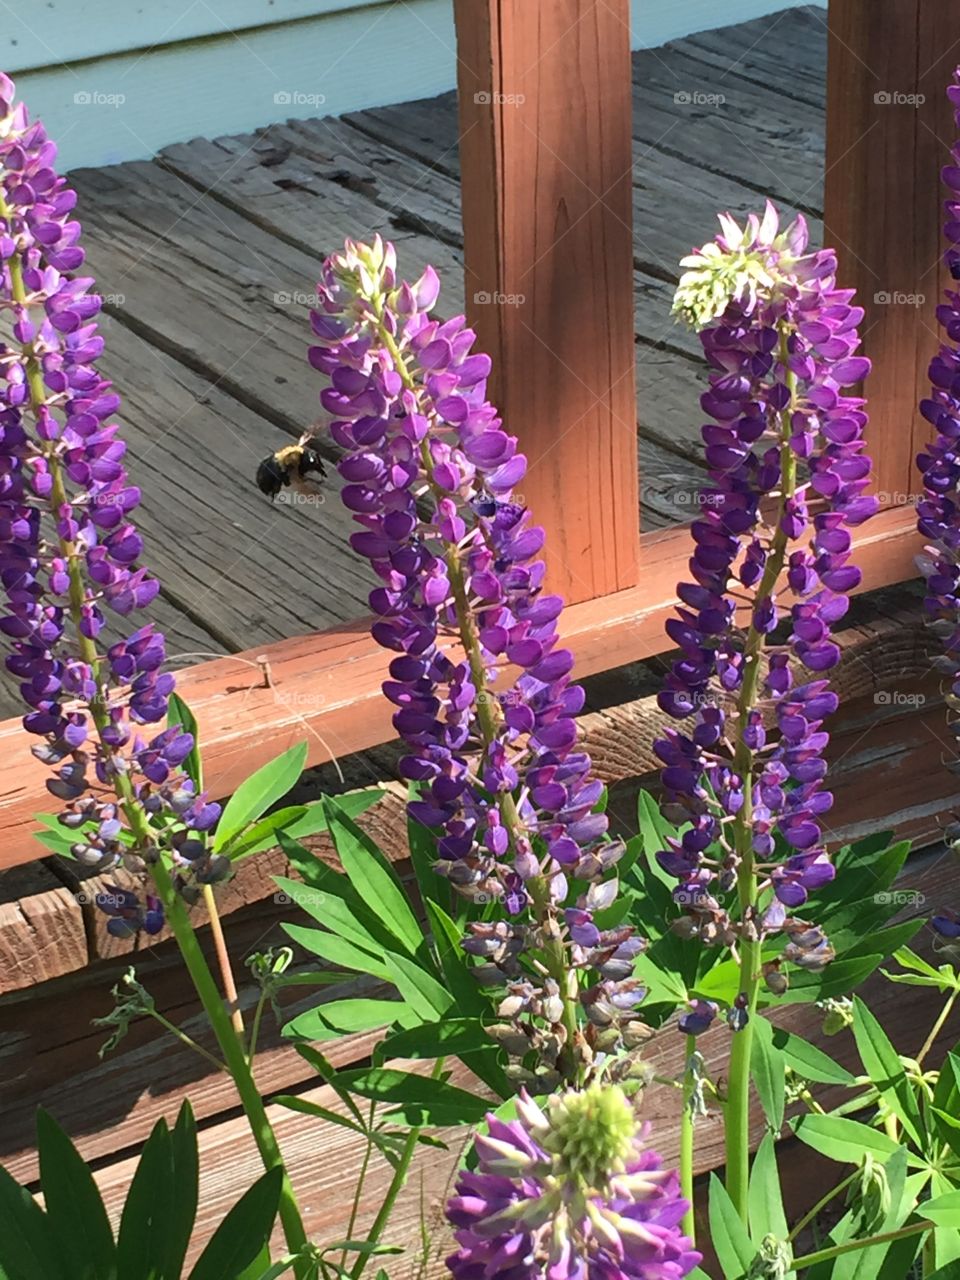 Maine lupine growing strong and true. Beautiful purples, whites and pinks sway in the breeze, attracting the bees. 